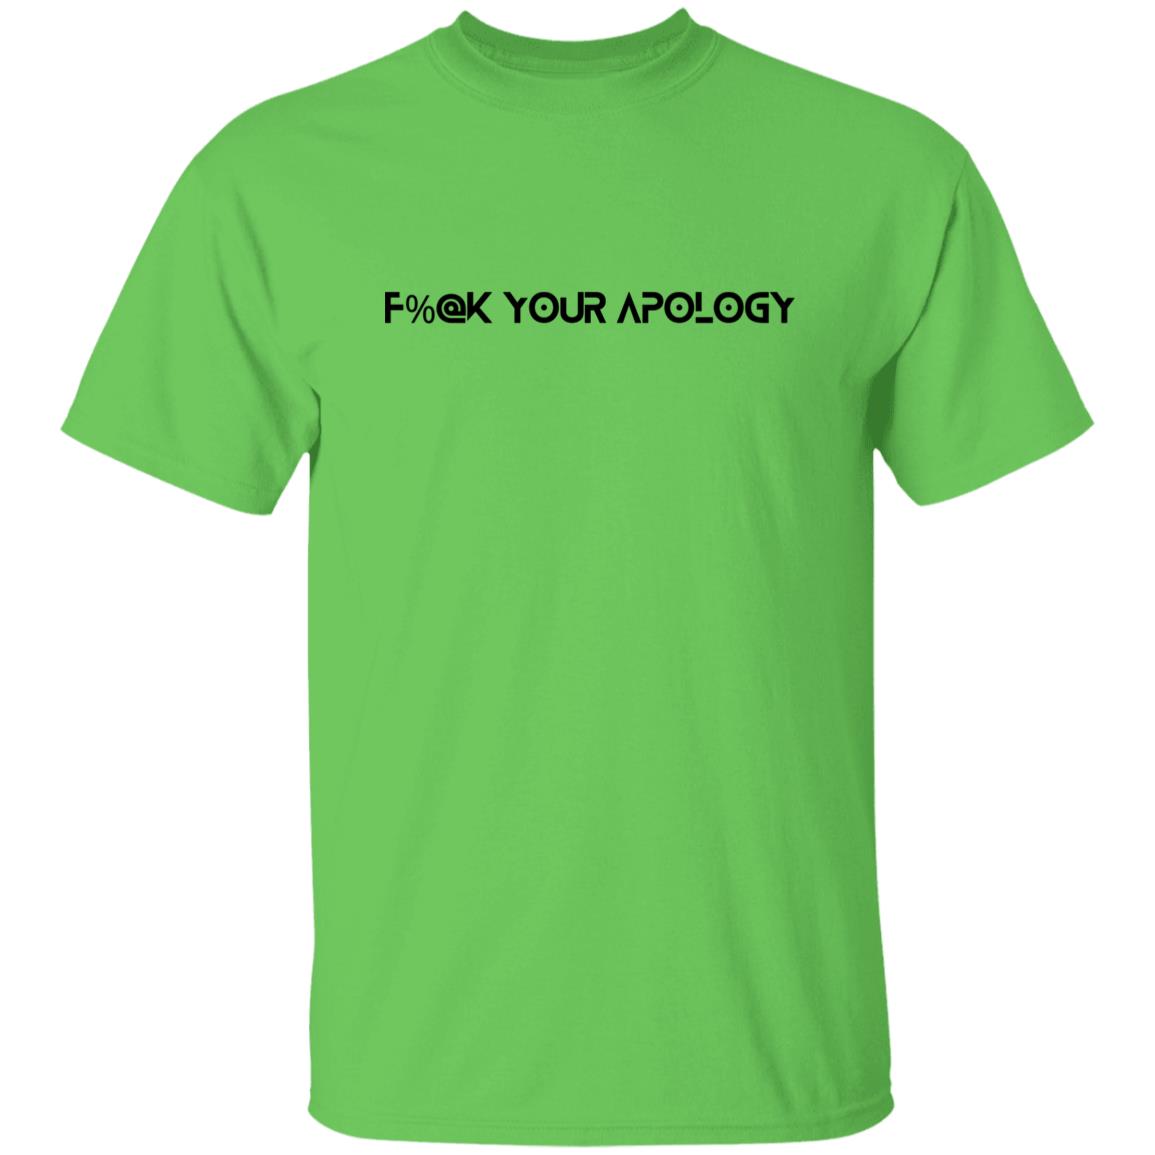 F%@k Your Apology T-Shirt